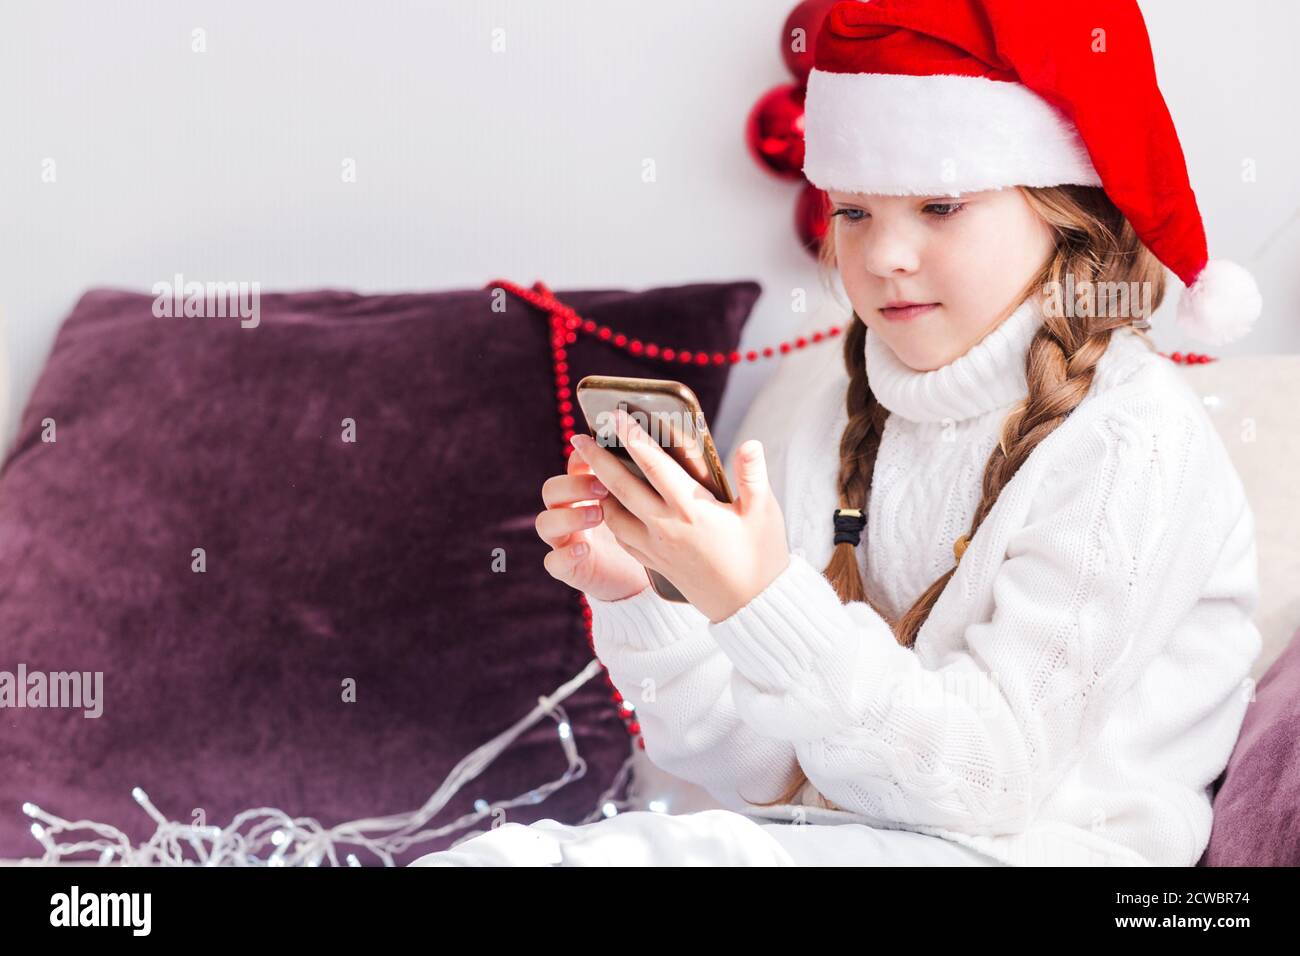 A little girl in a white sweater and a Santa Claus hat looks at a mobile phone in her hands. Stock Photo